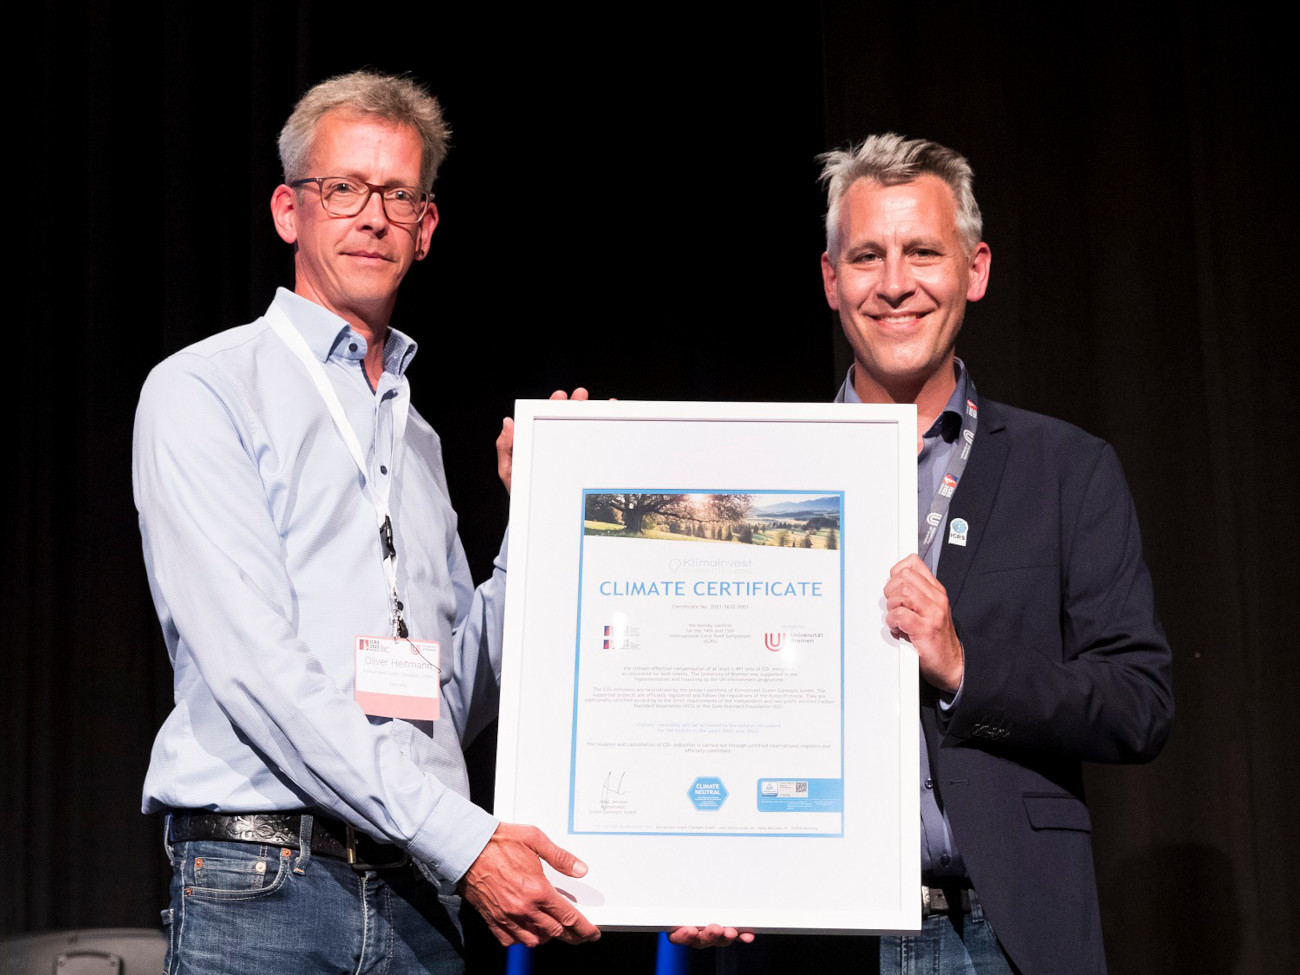 Christian Wild receives the certificate of climate neutrality for the ICRS from KlimaInvest.